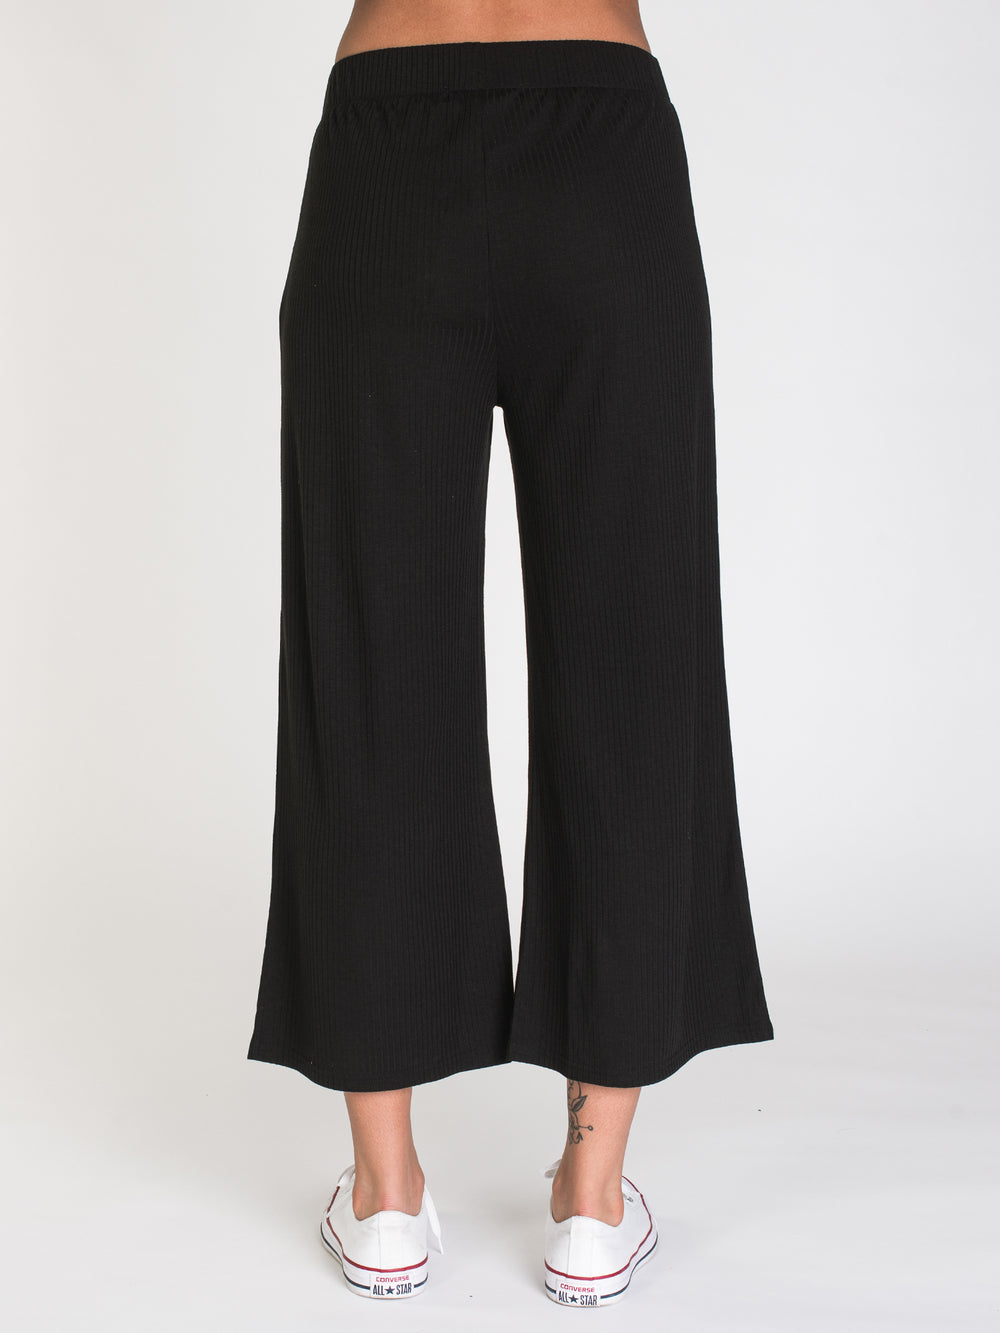 HARLOW BREANNA CROPPED KNIT PANT - CLEARANCE